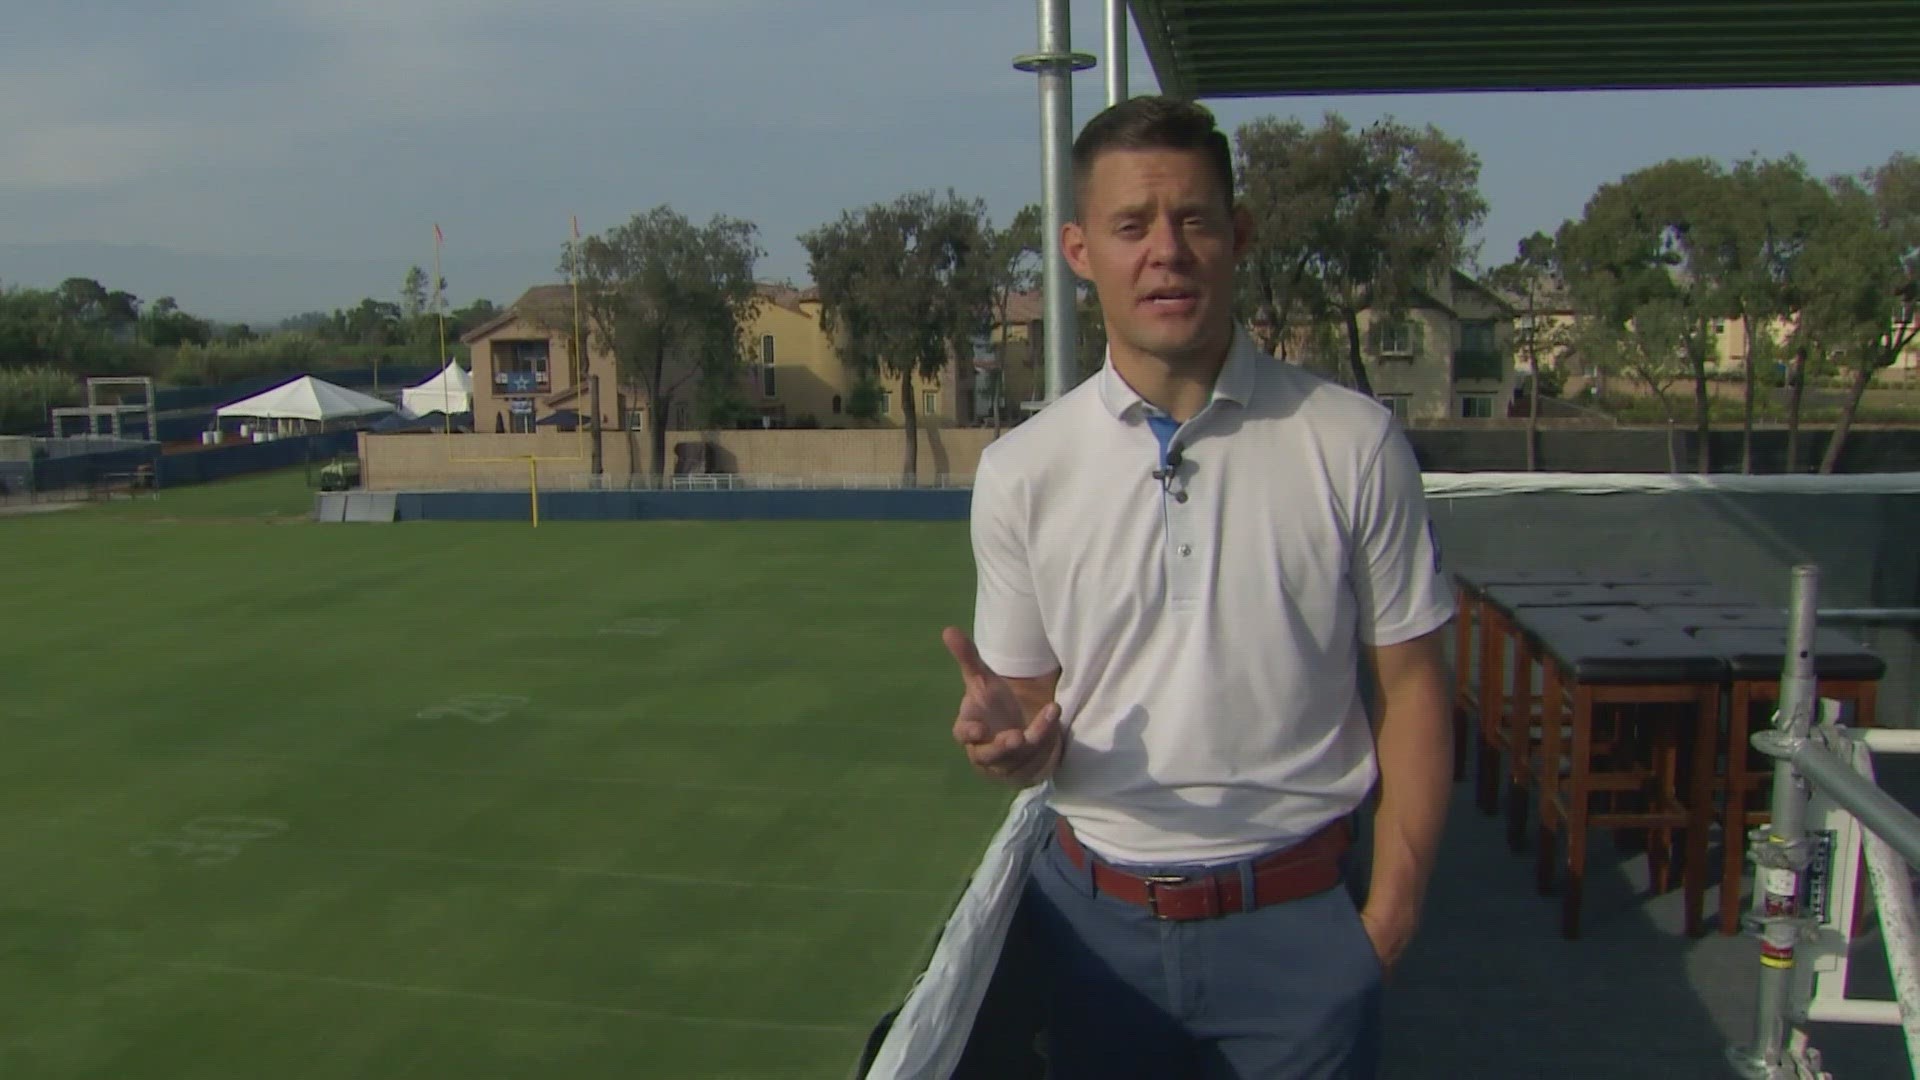 WFAA's Mike Leslie gives us a tour of the Dallas Cowboys training camp facility in Oxnard, California.